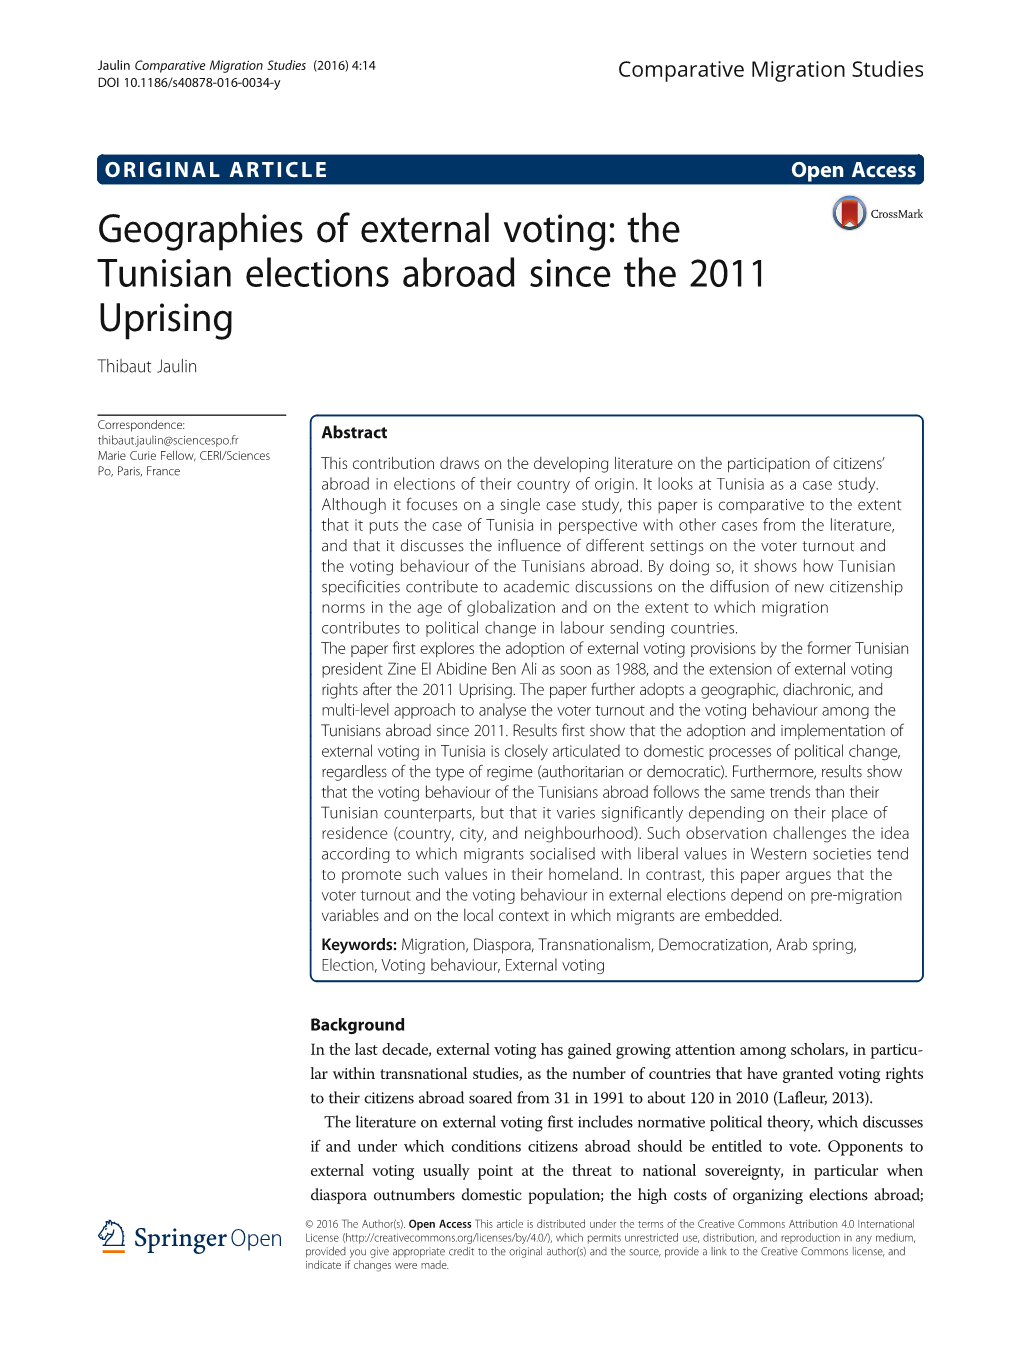 Geographies of External Voting: the Tunisian Elections Abroad Since the 2011 Uprising Thibaut Jaulin